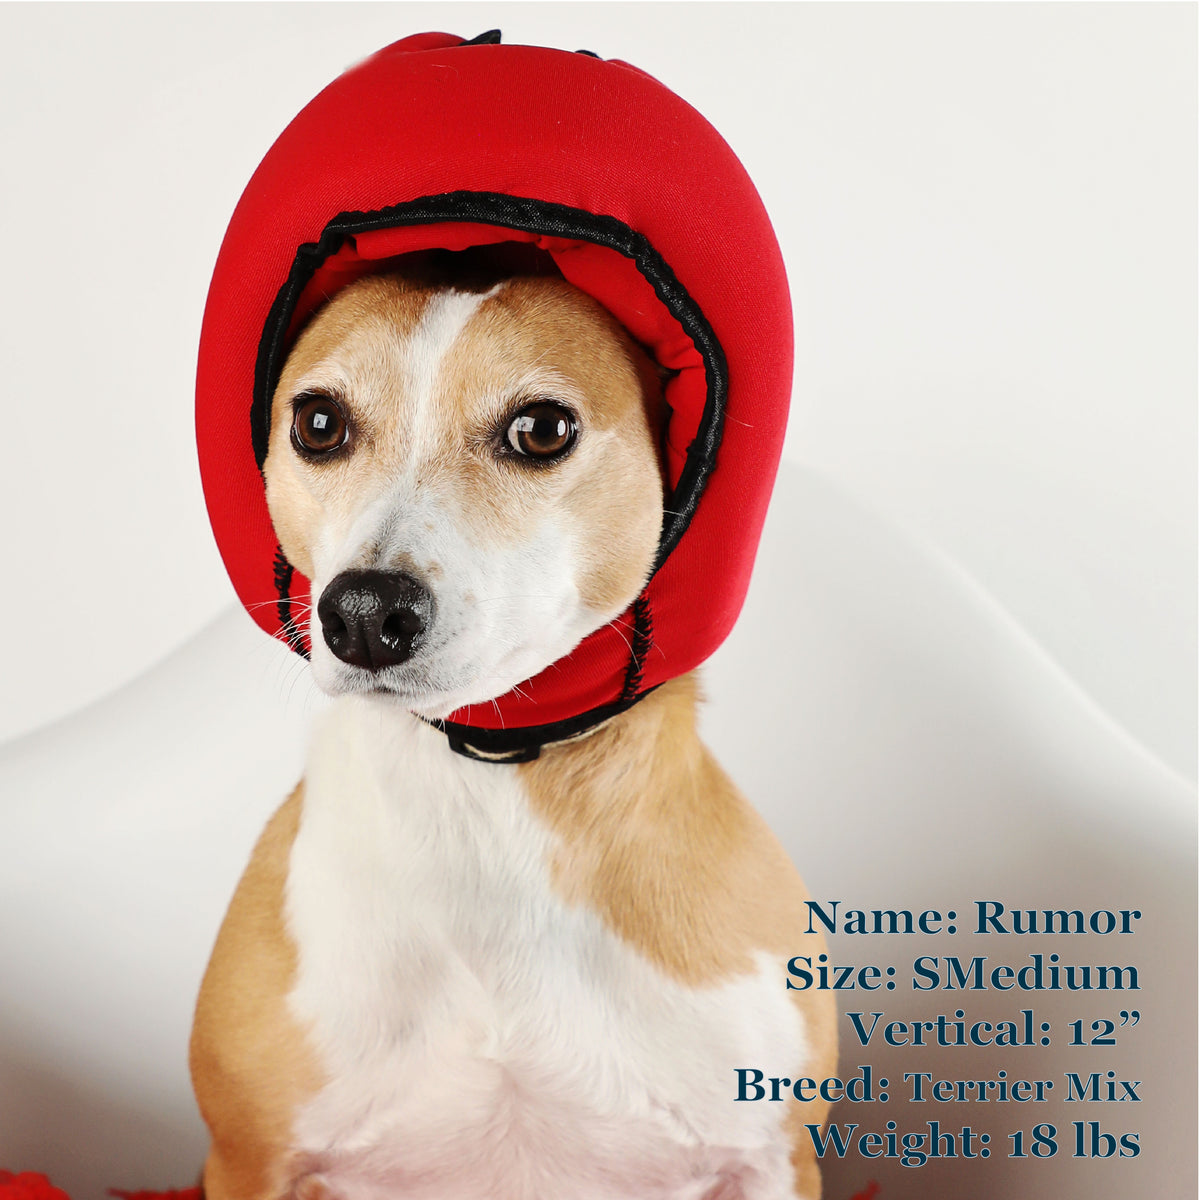 Rumor is a Terrier Mix in a SMedium Red PAWNIX Noise Cancelling Headset for dogs